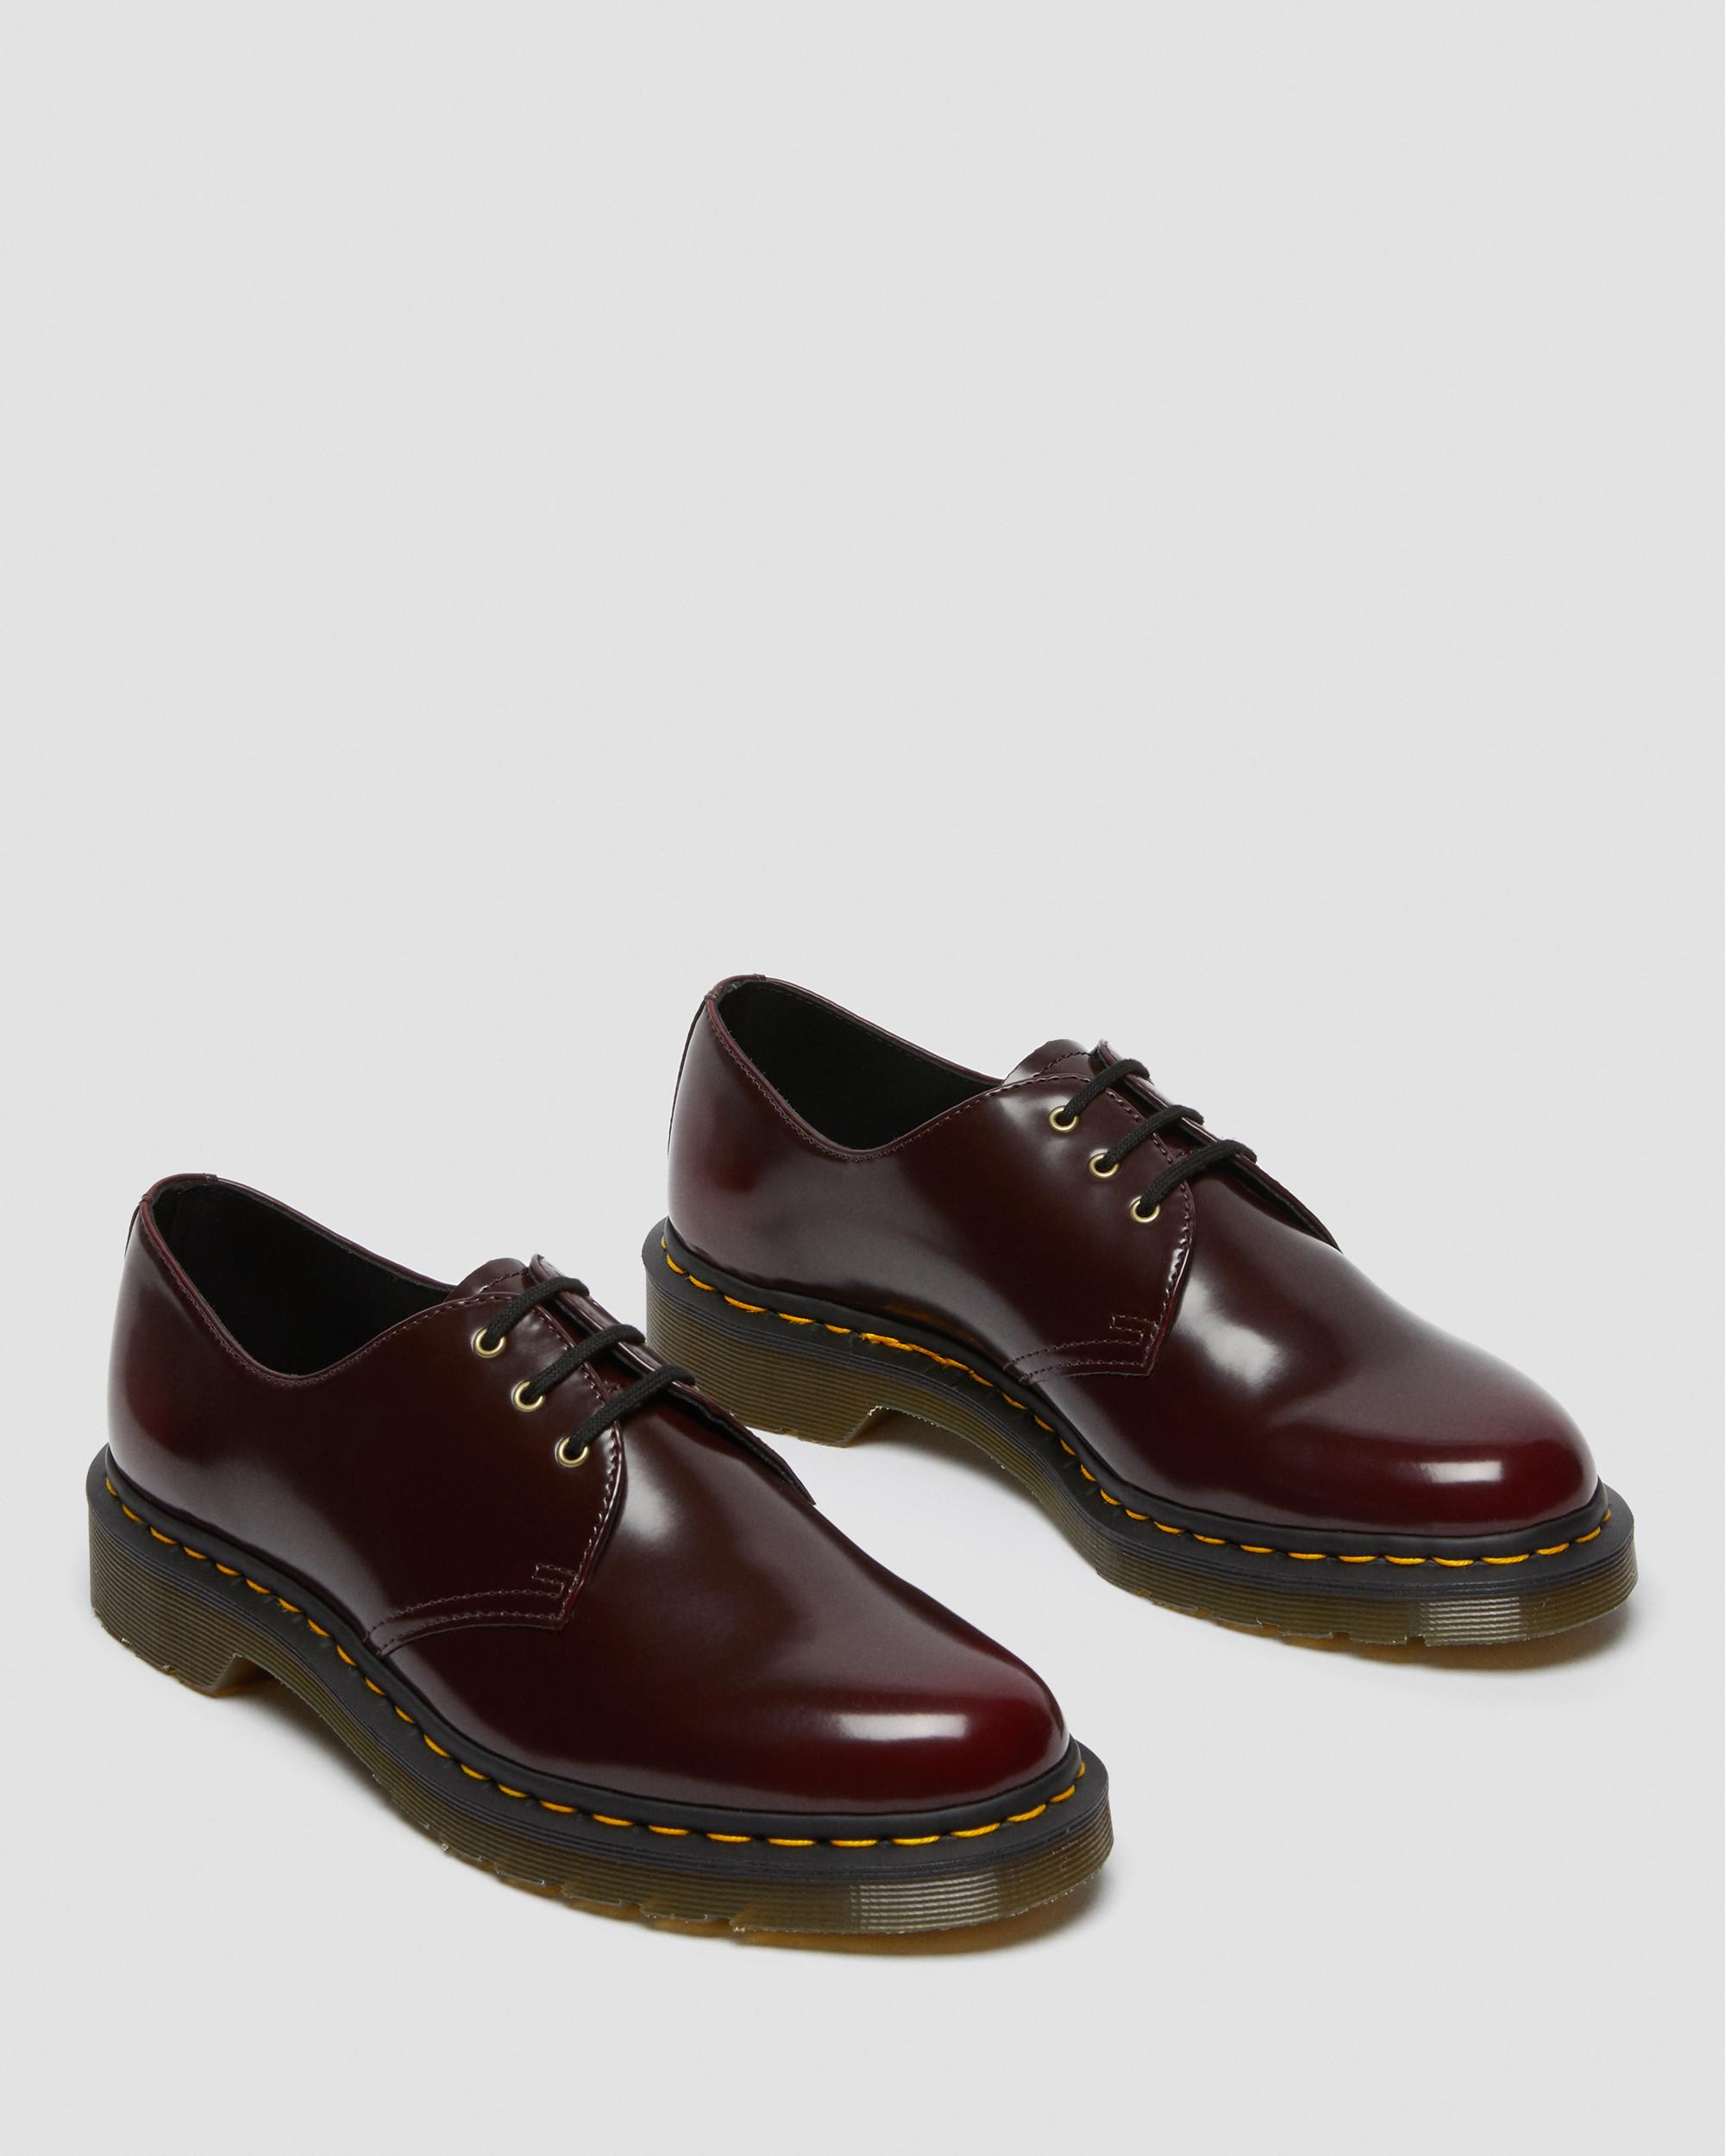 Vegan 1461 Oxford Shoes in Cherry Red | Dr. Martens